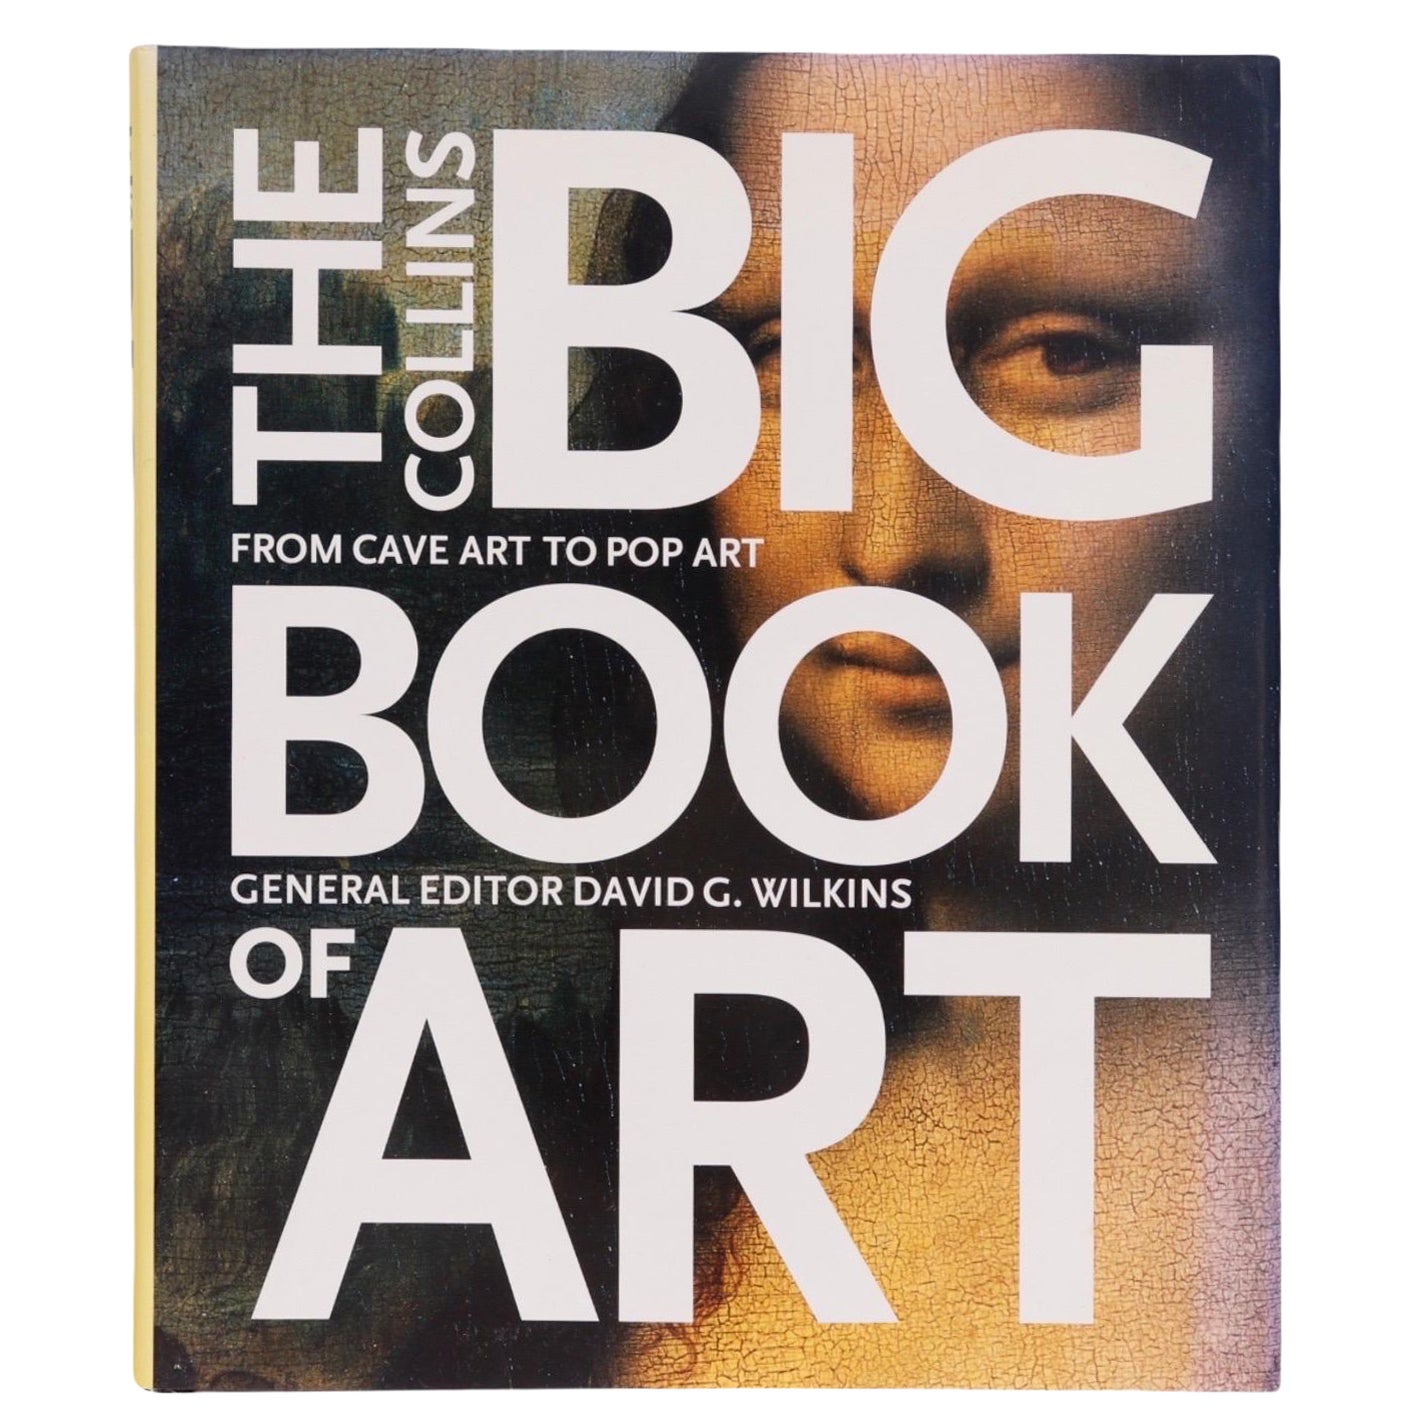 The Collins Big Book of Art, First Edition